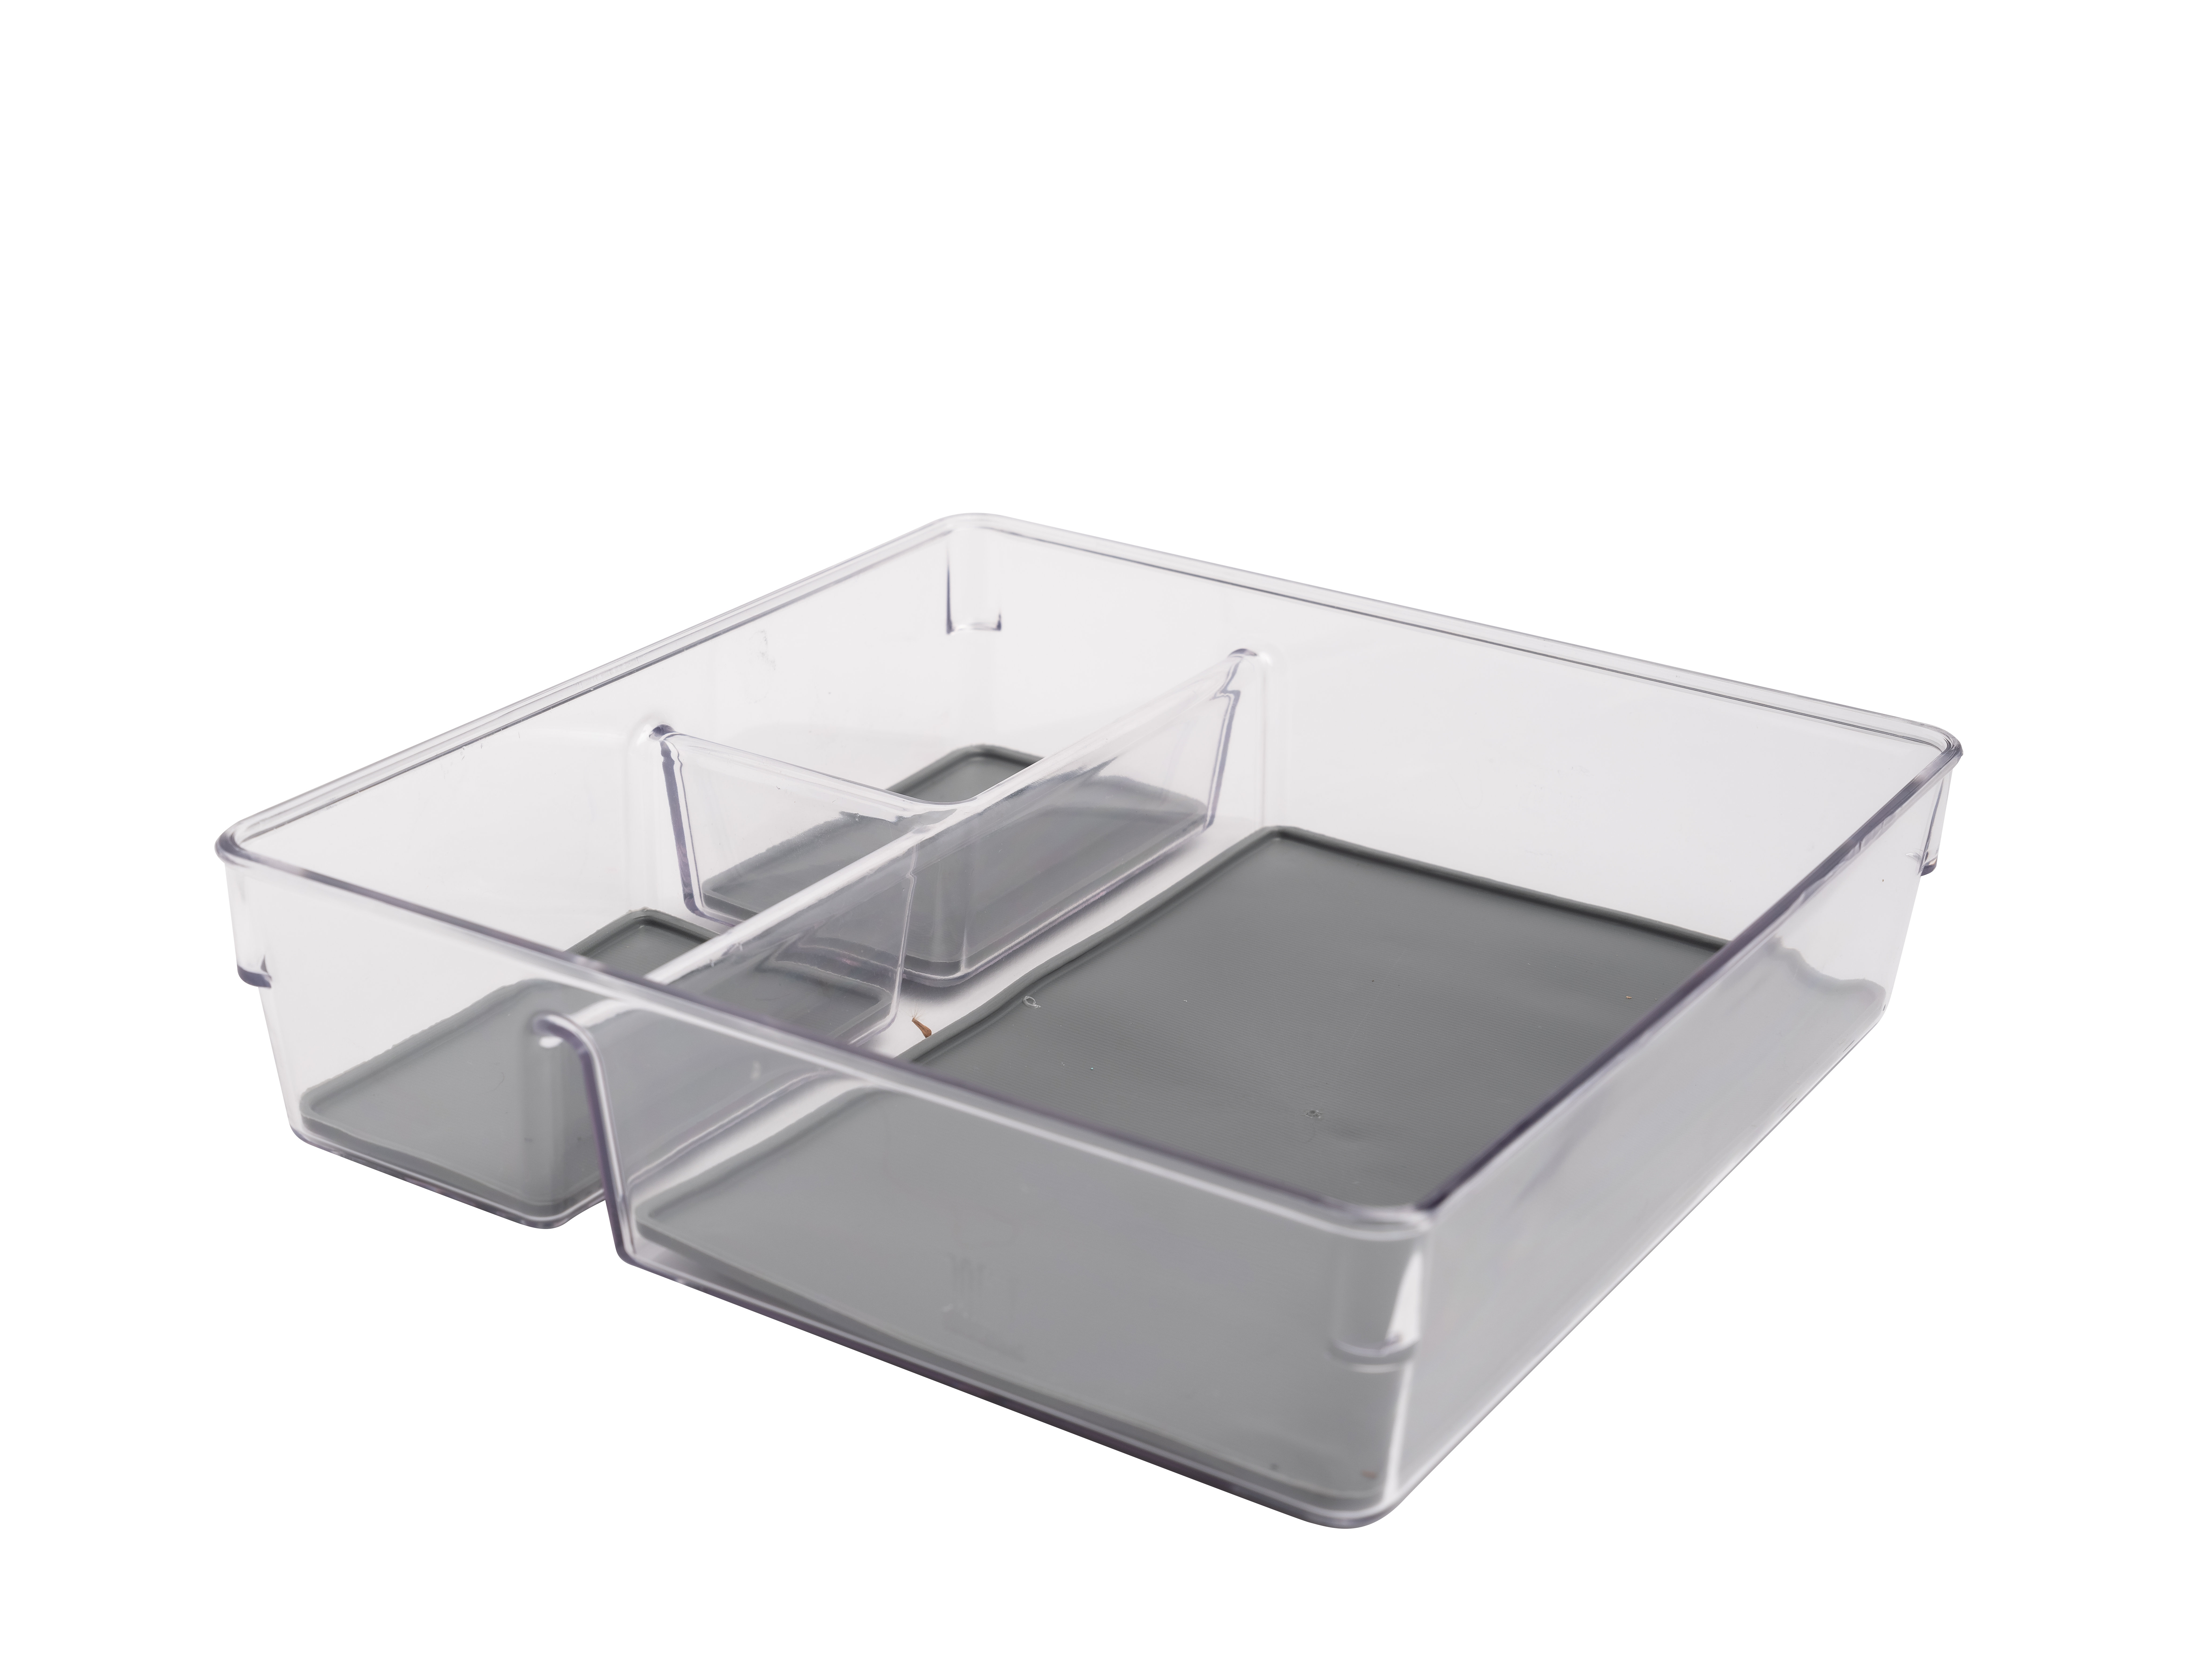 Sorbus Narrow Clear Drawer Organizers - high-quality and durable